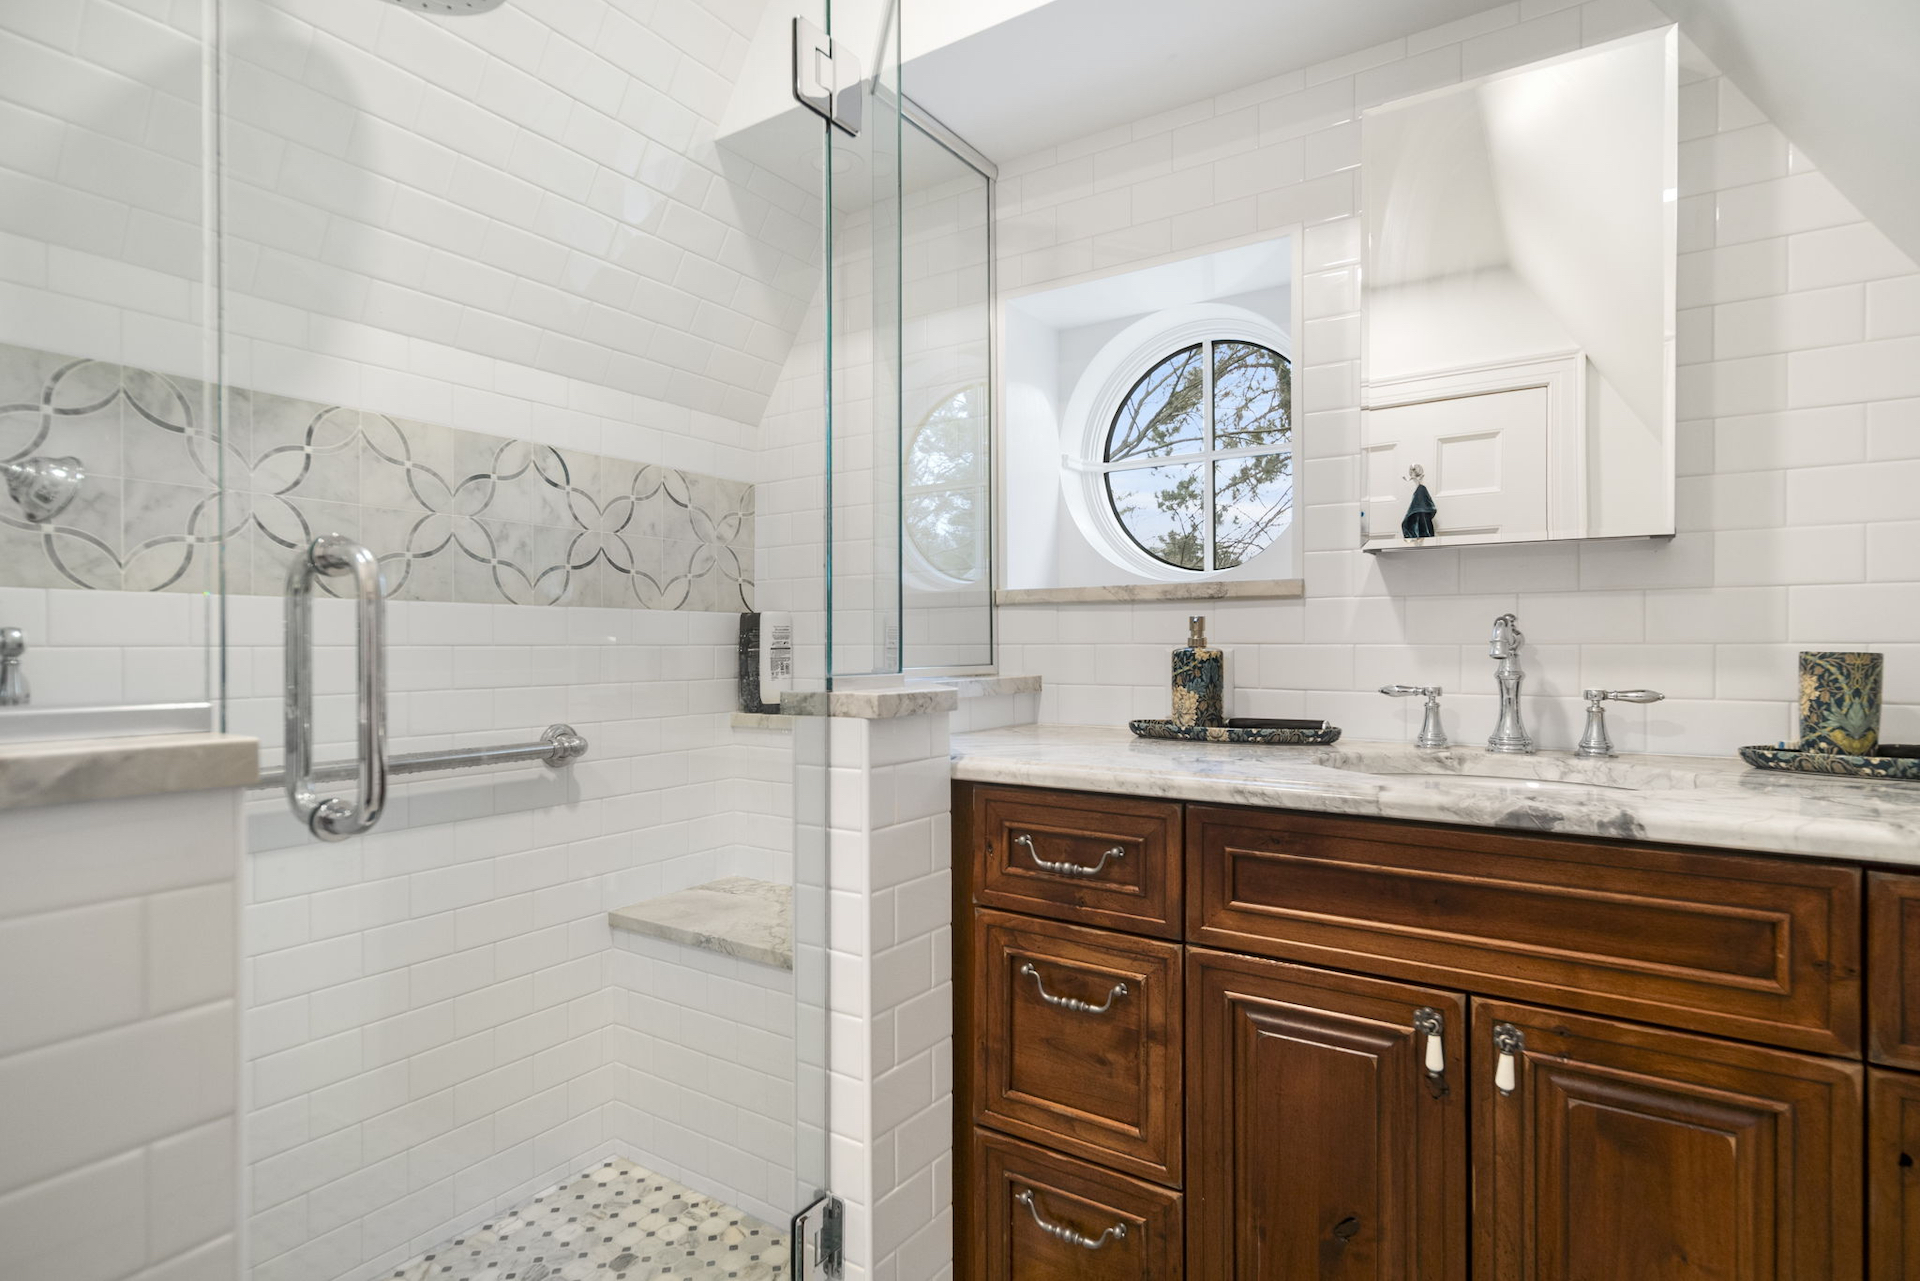 Remodeled white bathroom with dark wood cabinet in the Cayuga Heights neighborhood of Ithaca NY